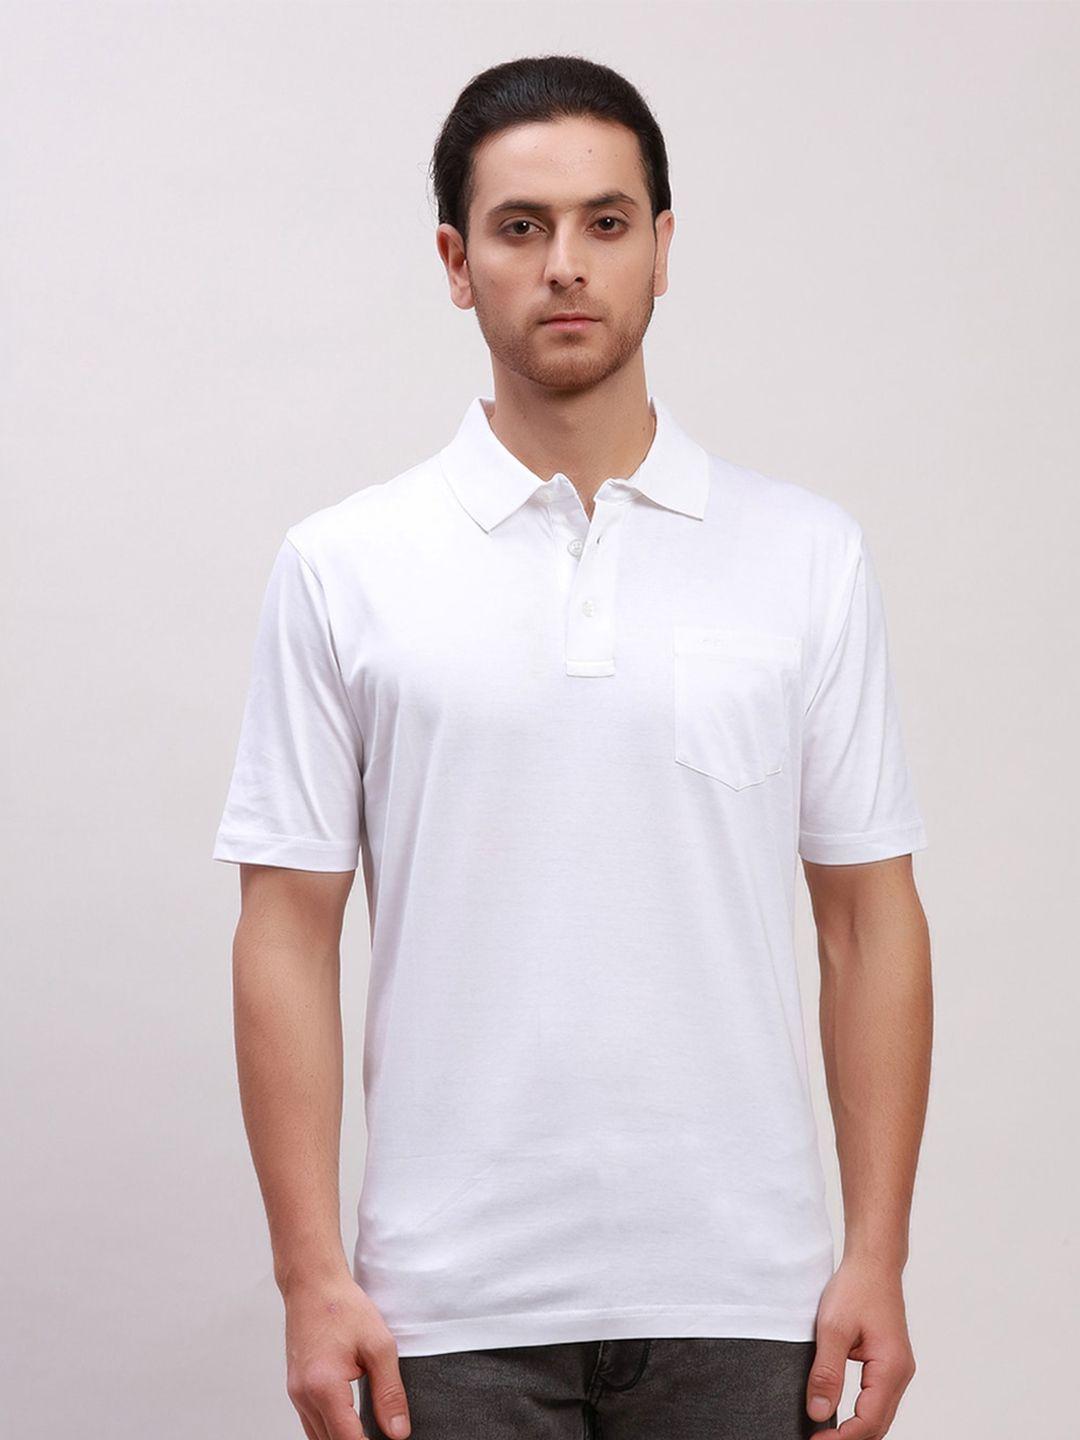 colorplus polo collar short sleeves cotton t-shirt